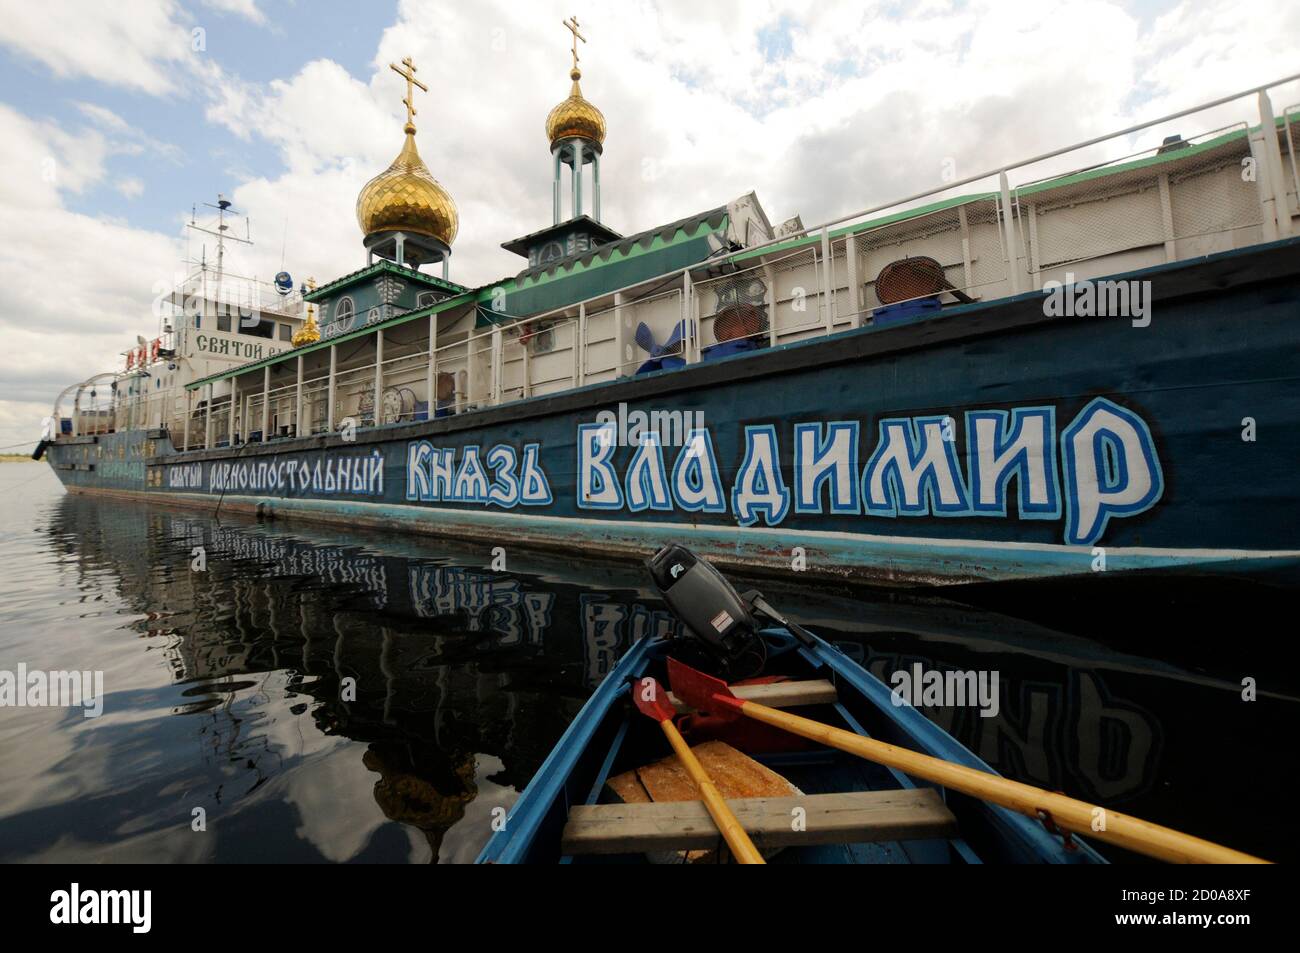 The Saint Vladimir floating Orthodox Christian temple is seen tied up at a mooring on the Volga river in the southern city of Volgograd May 10, 2011. The self-propelled ship-temple which bears the full name 'Grand Prince St. Vladimir, Equal-to-the-Apostles' was reconstructed on the base of a landing ship and christened October 31, 2004, according to its builders.  REUTERS/Sergei Karpov  (RUSSIA - Tags: RELIGION SOCIETY ODDLY TRANSPORT) Stock Photo